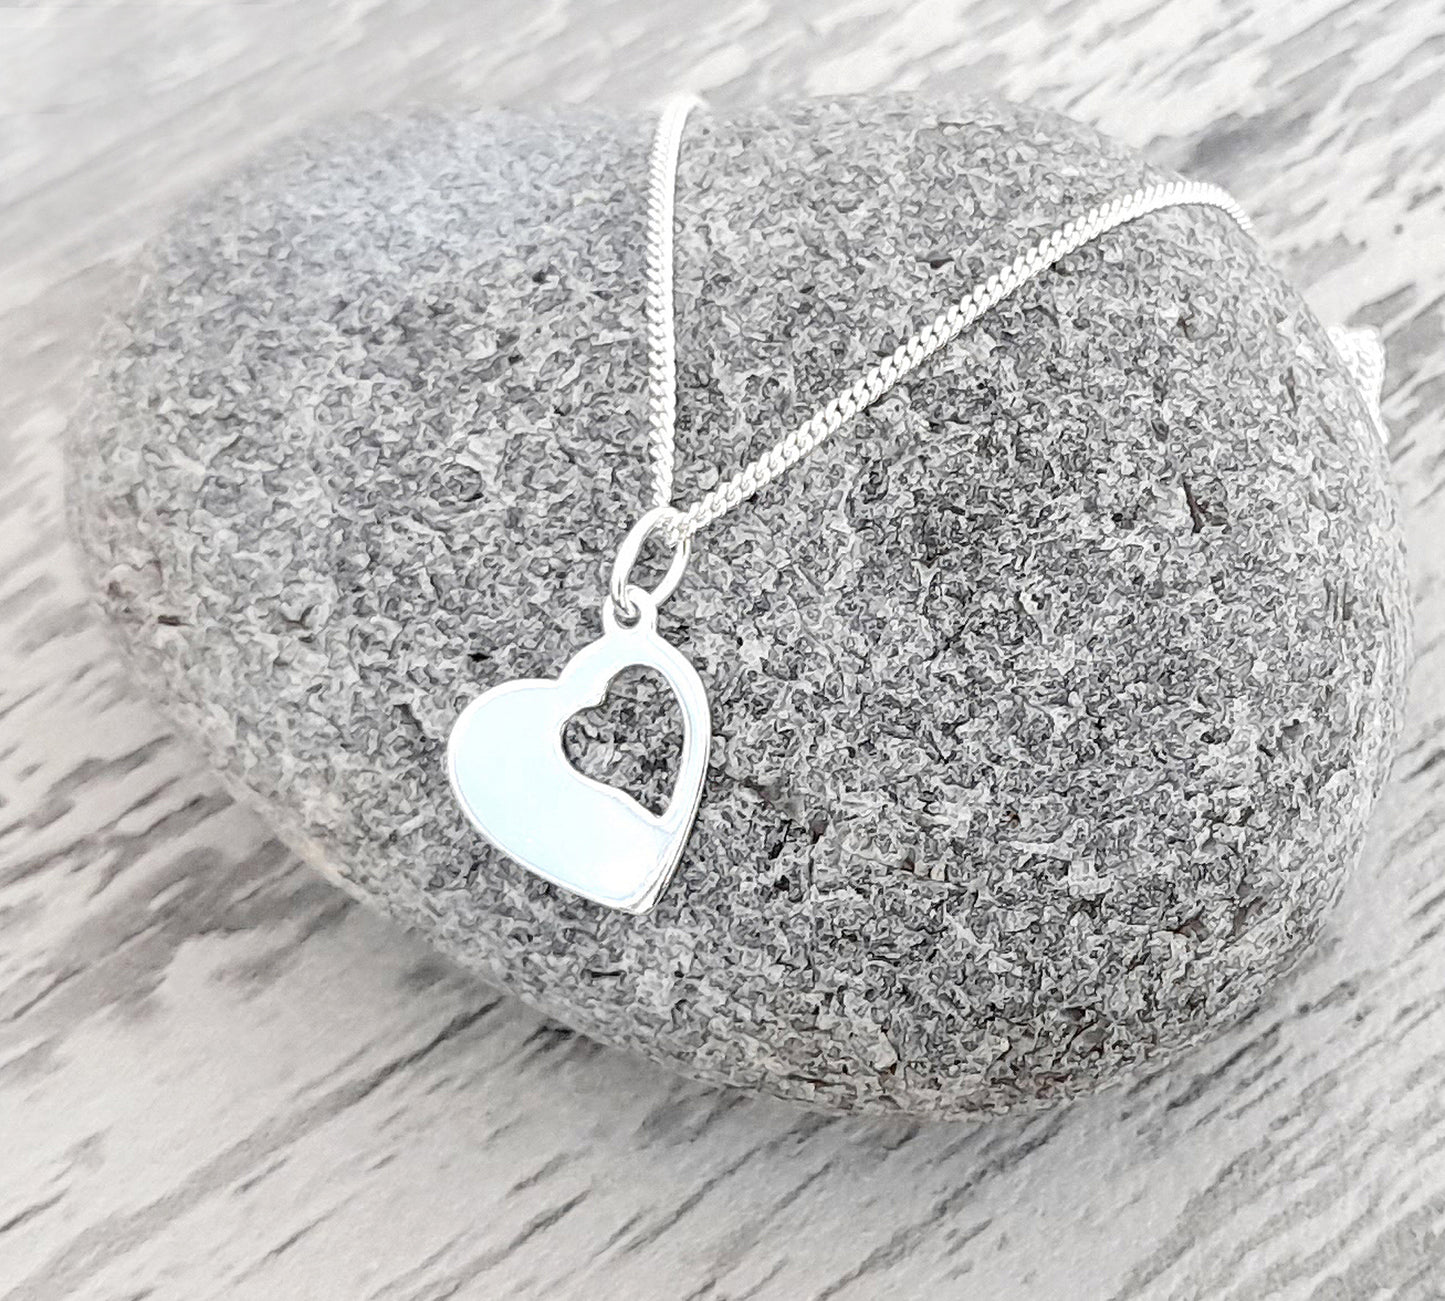 Granddaughter Cut Out Heart Necklace in Sterling Silver 925, Personalised Gift